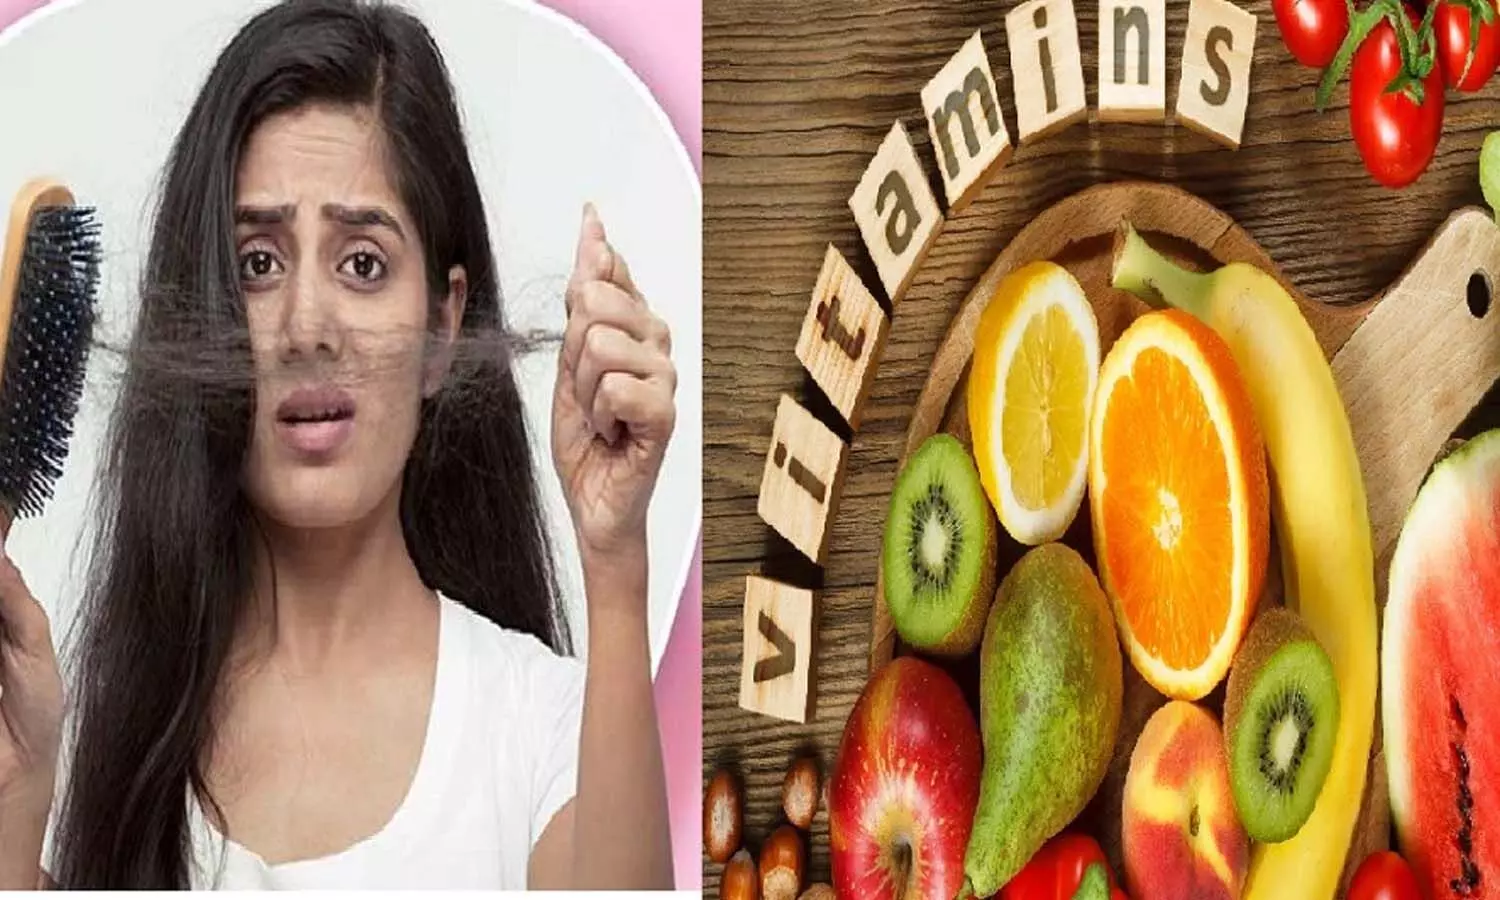 Vitamins For Hair Growth: By consuming these vitamins, your hair will grow faster